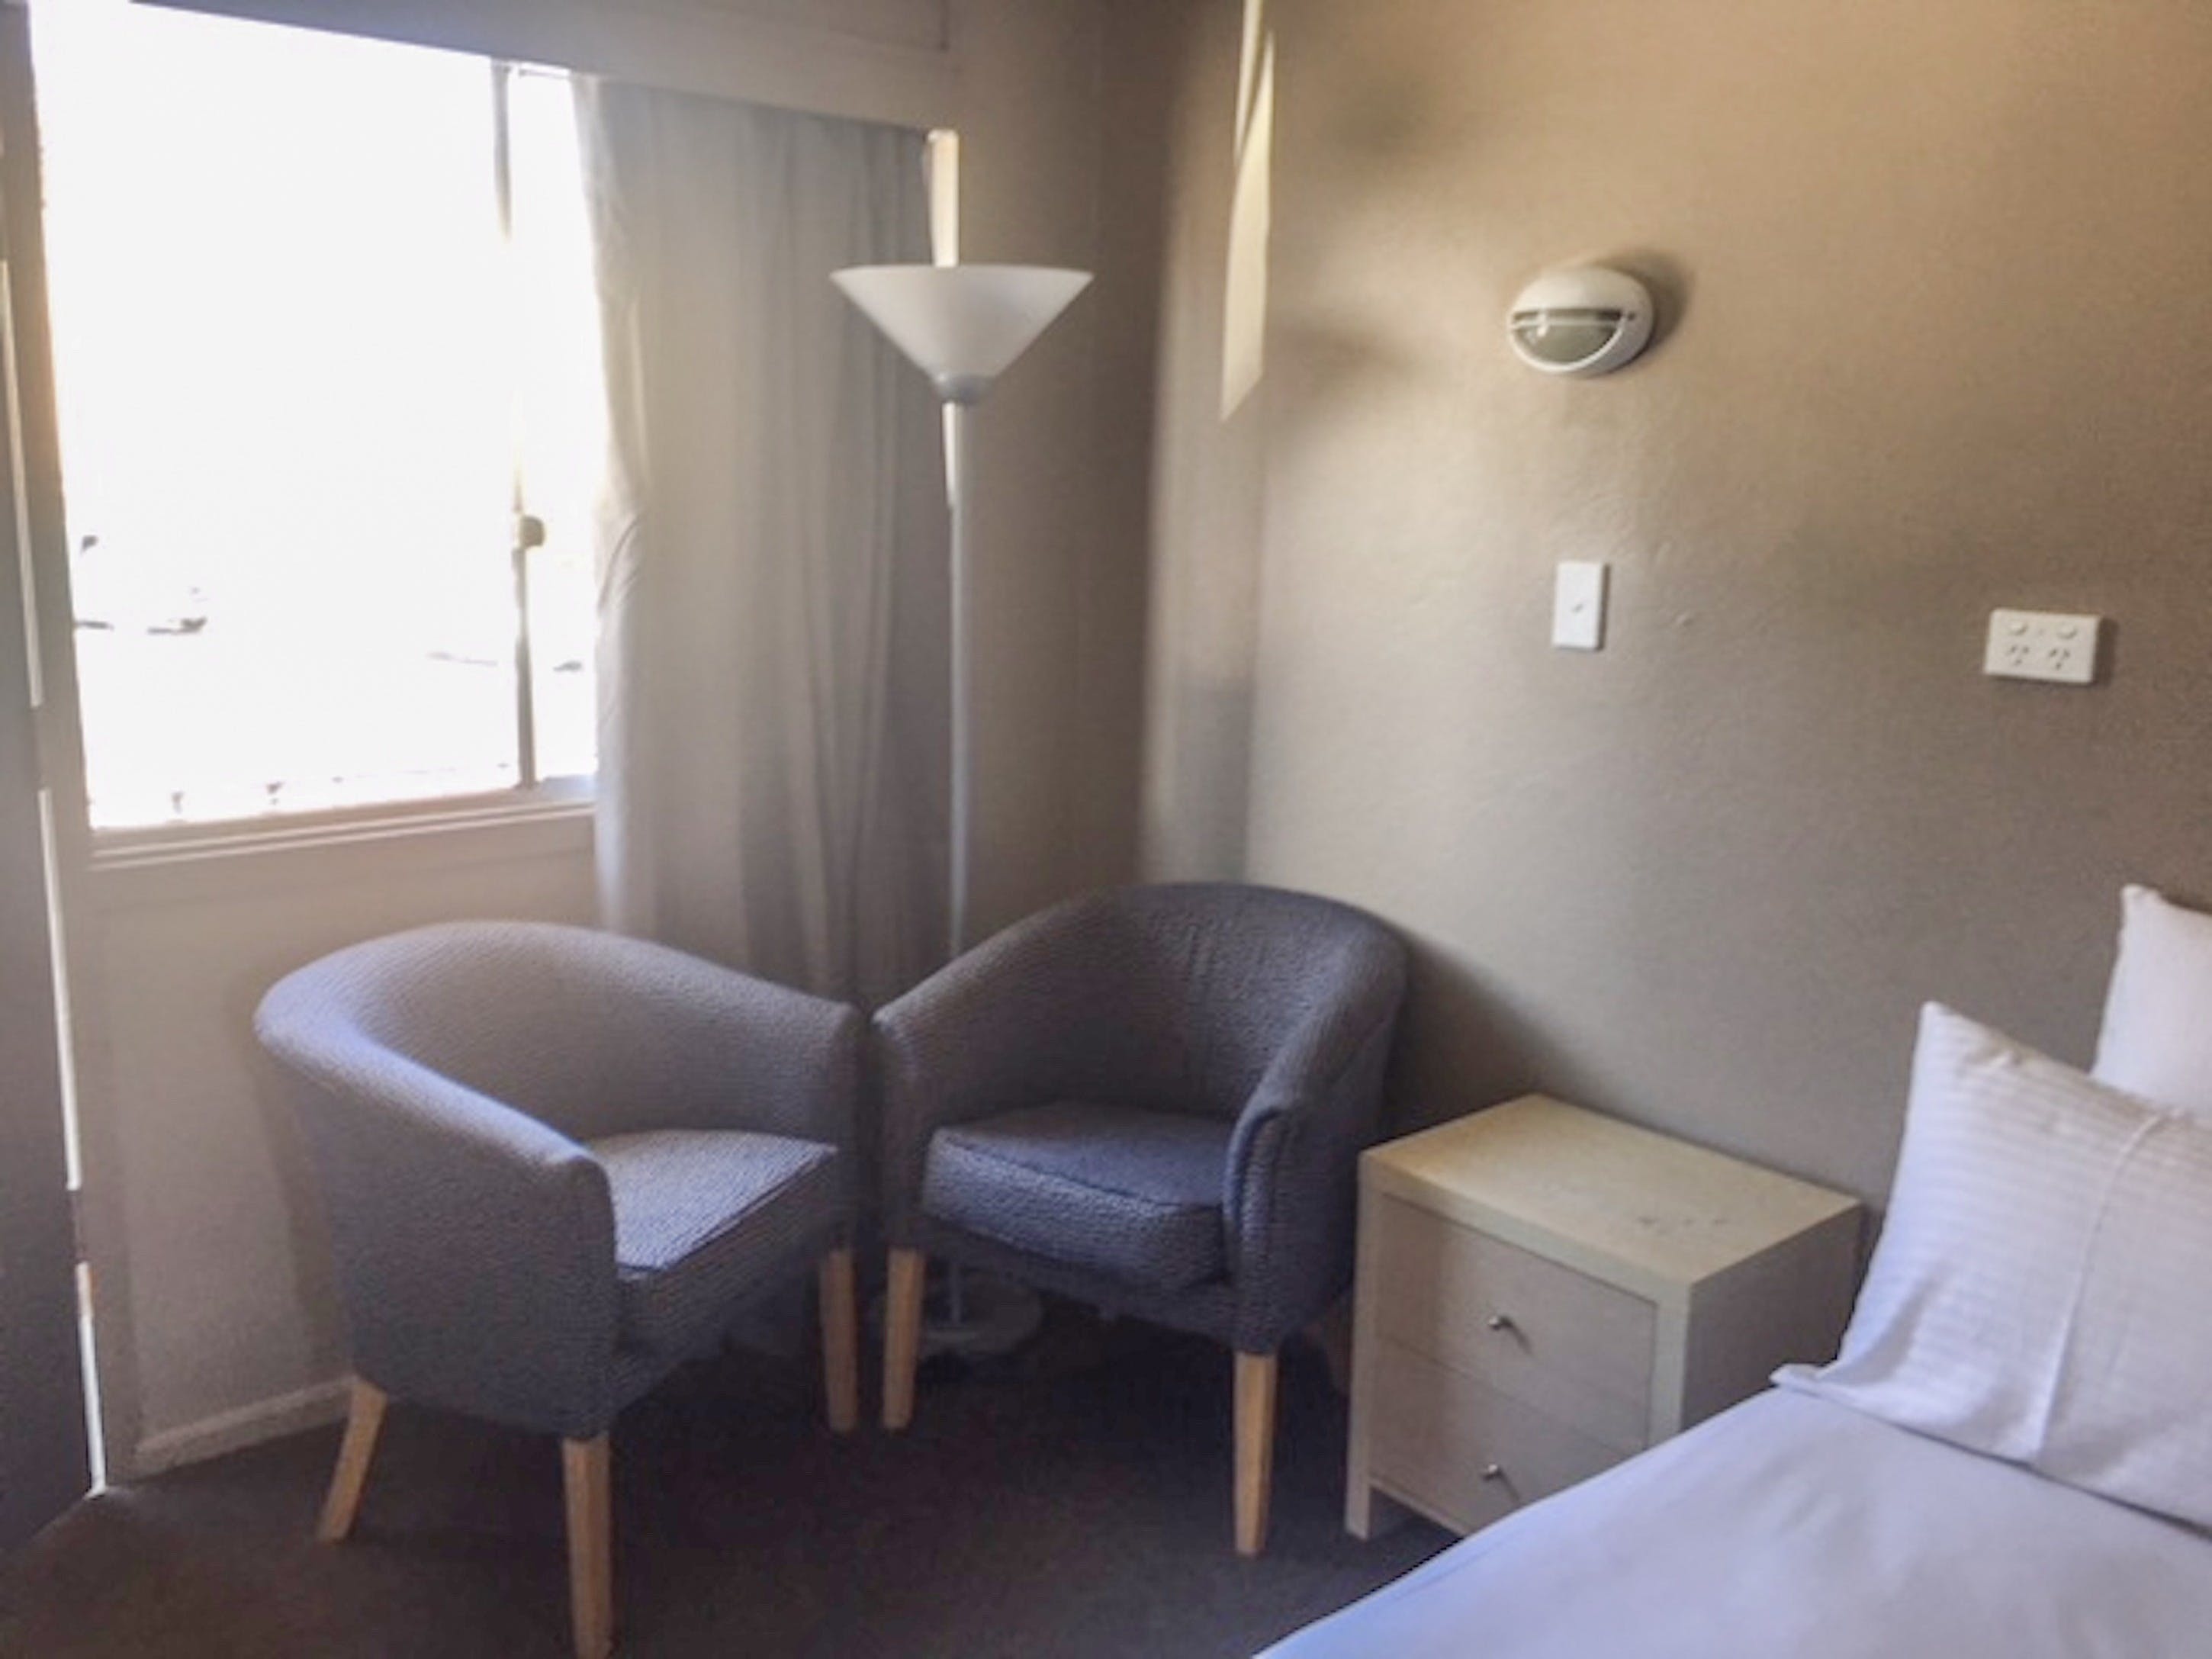 Commercial Hotel Motel Lithgow - Port Augusta Accommodation